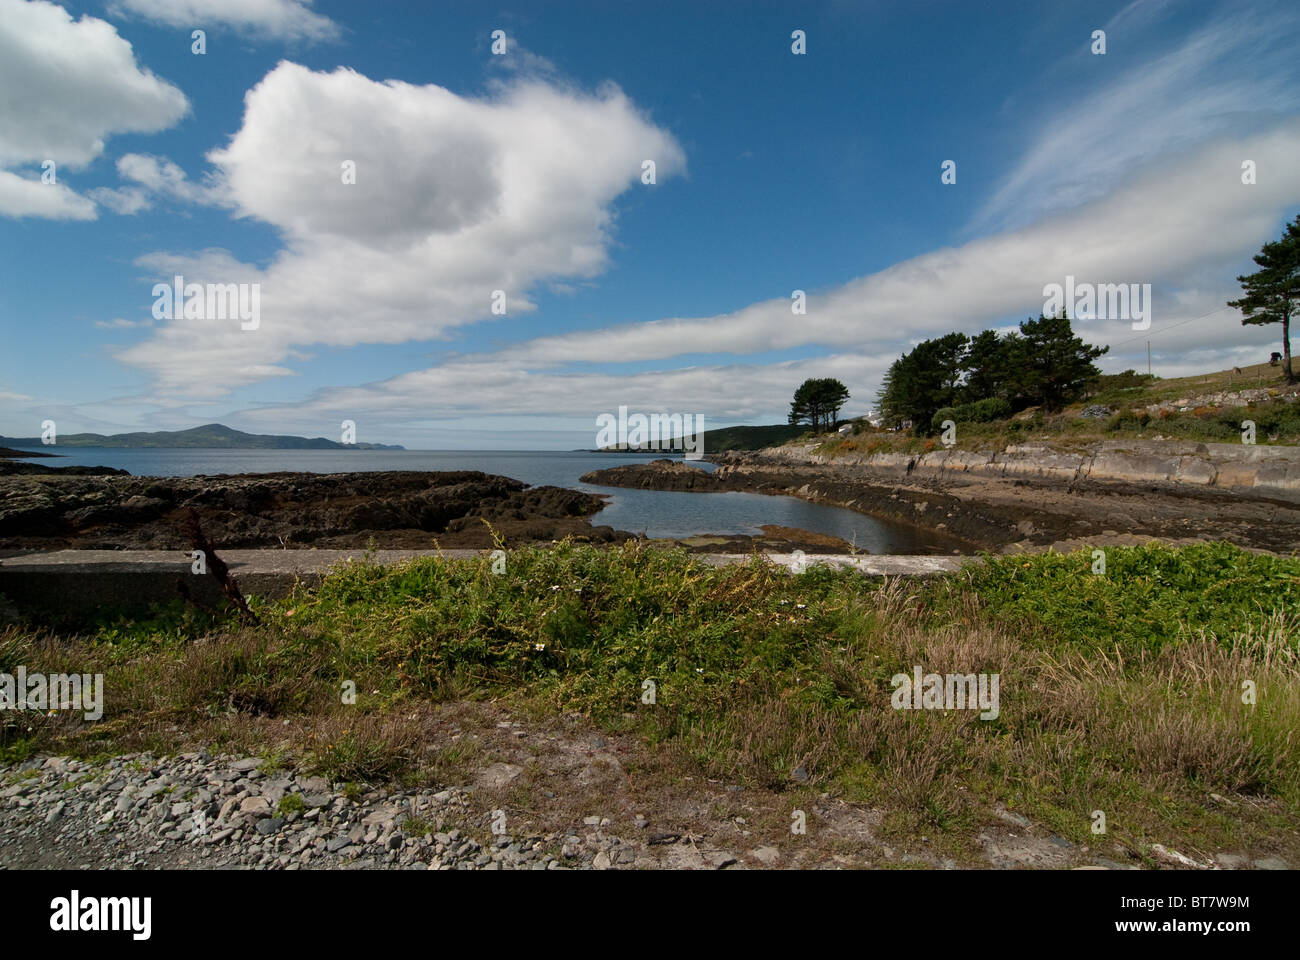 Reenmore beach, West Cork, Ireland. Small wall and greenery in front. with blue sky and wispy white clouds. Trees to right. Stock Photo